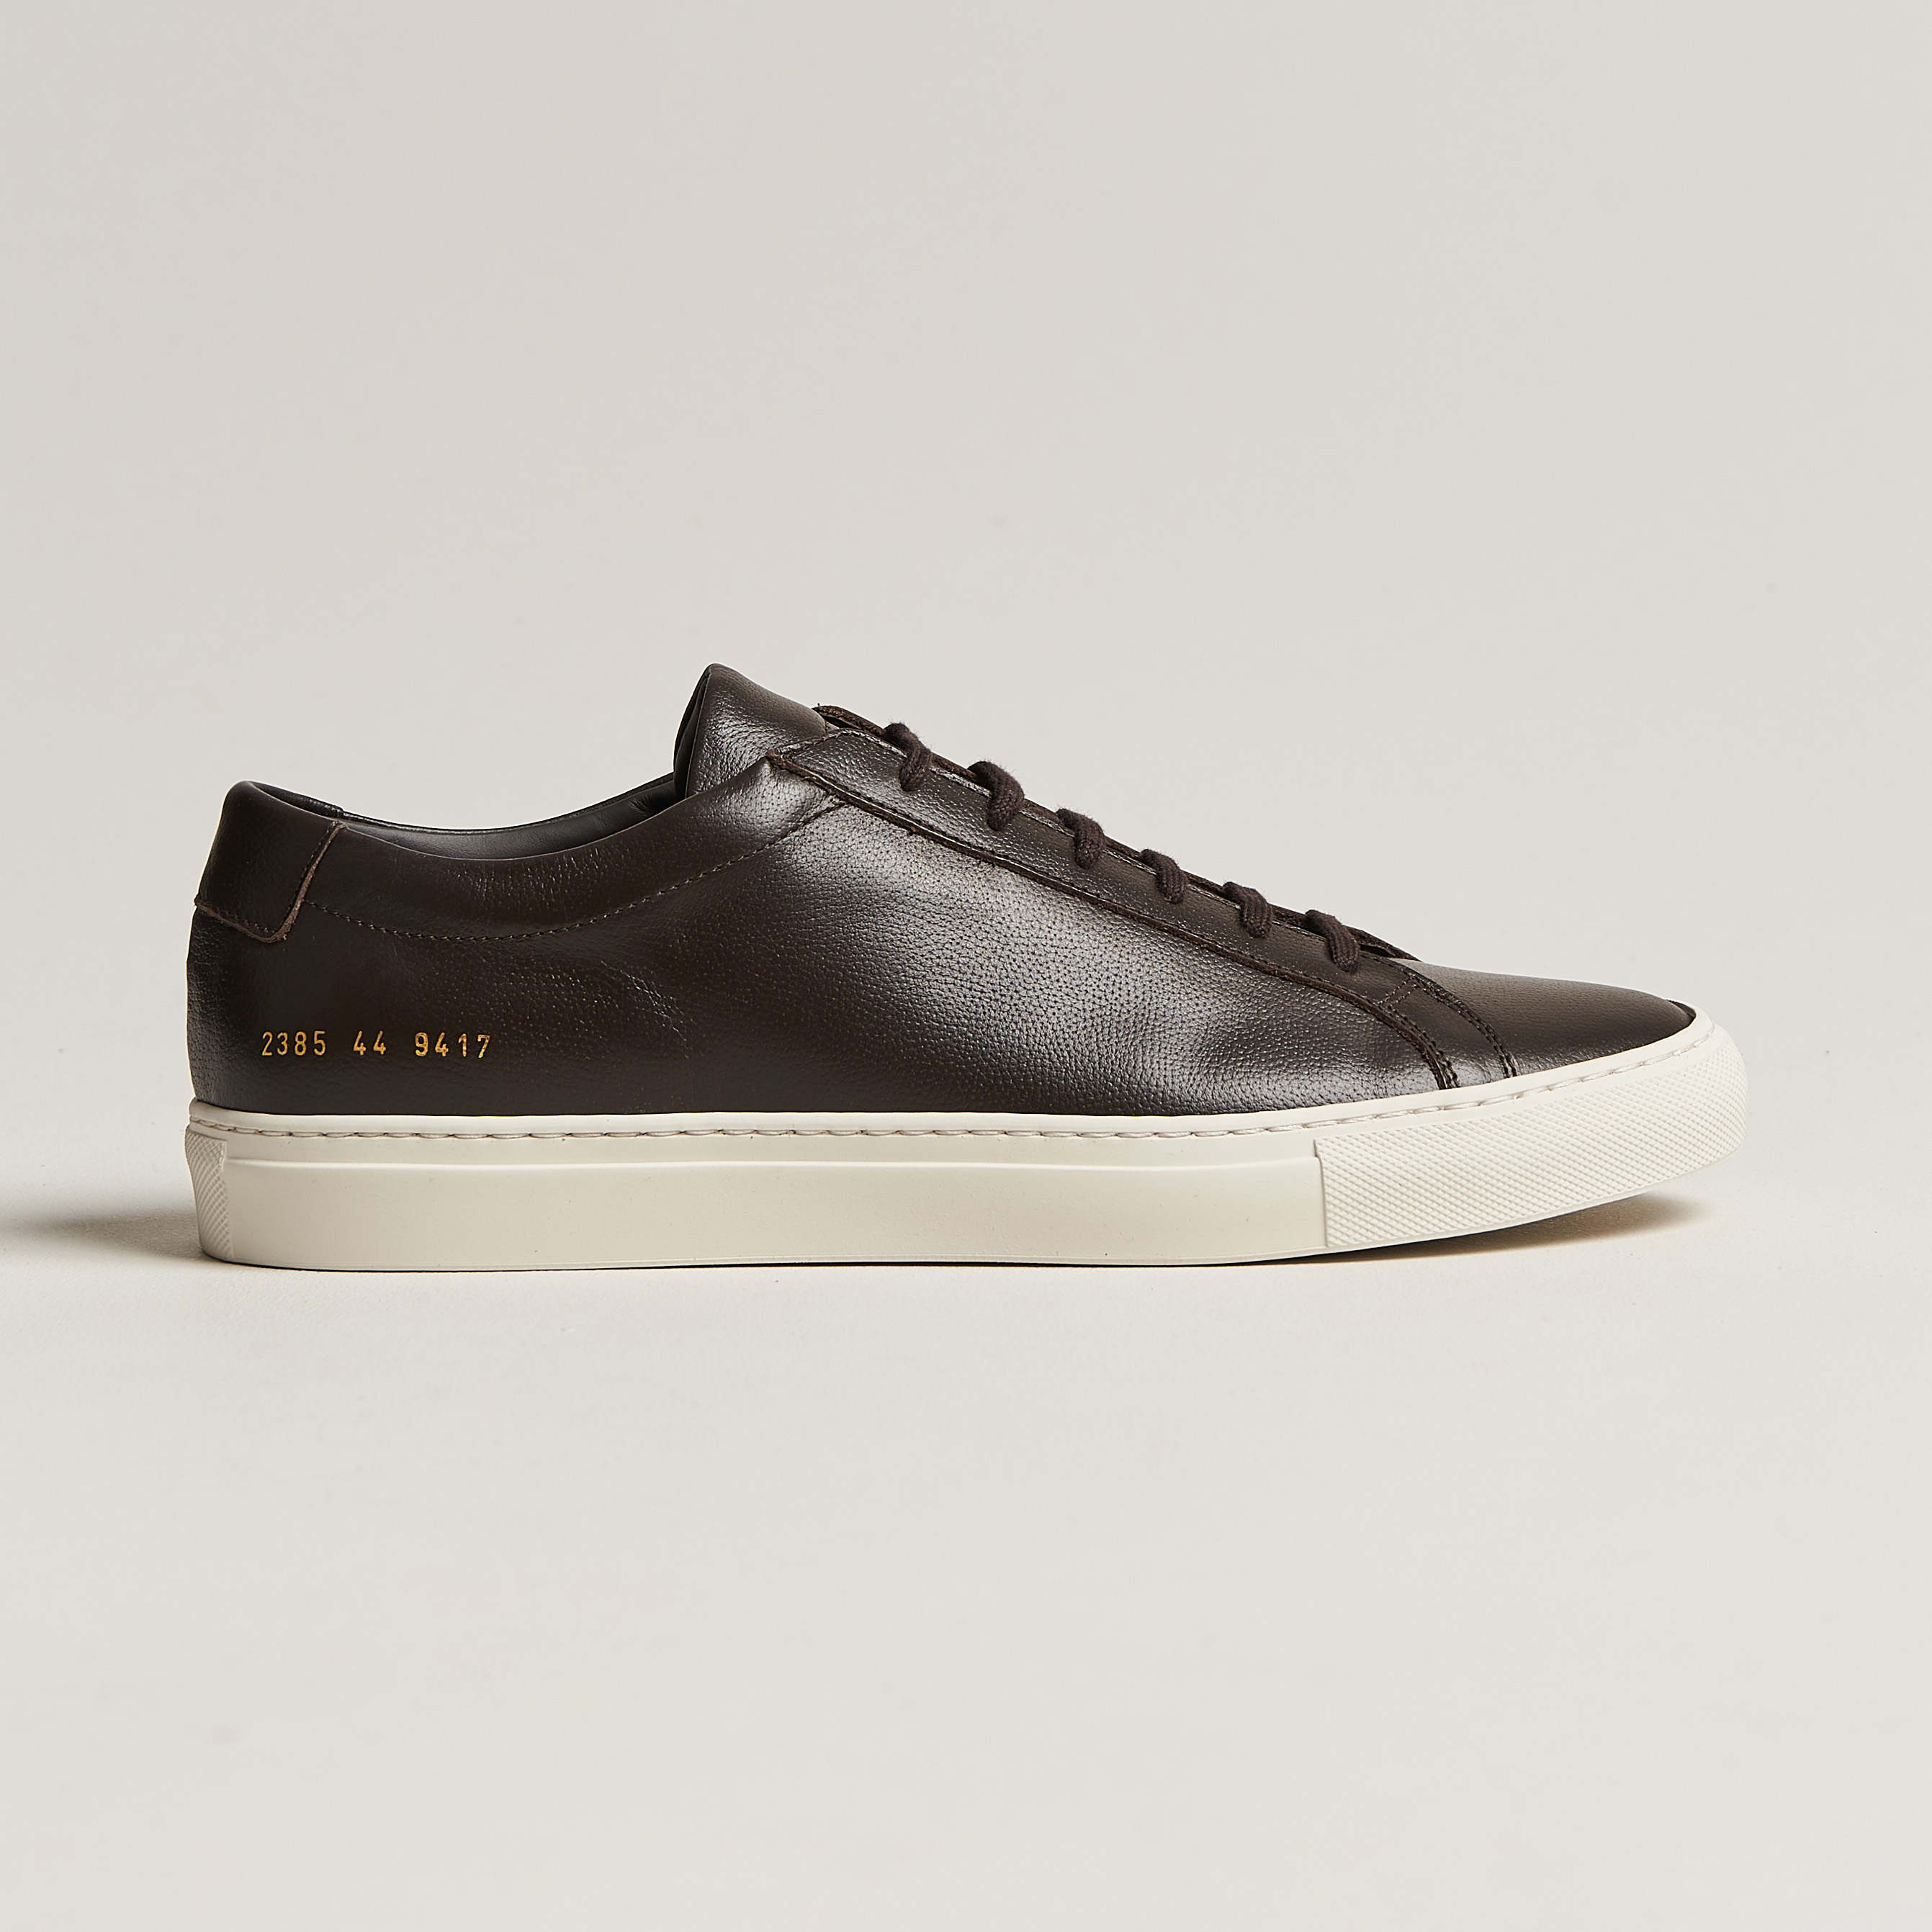 Common Projects Original Achilles Pebbled Leather Sneaker Dark Brown at Car